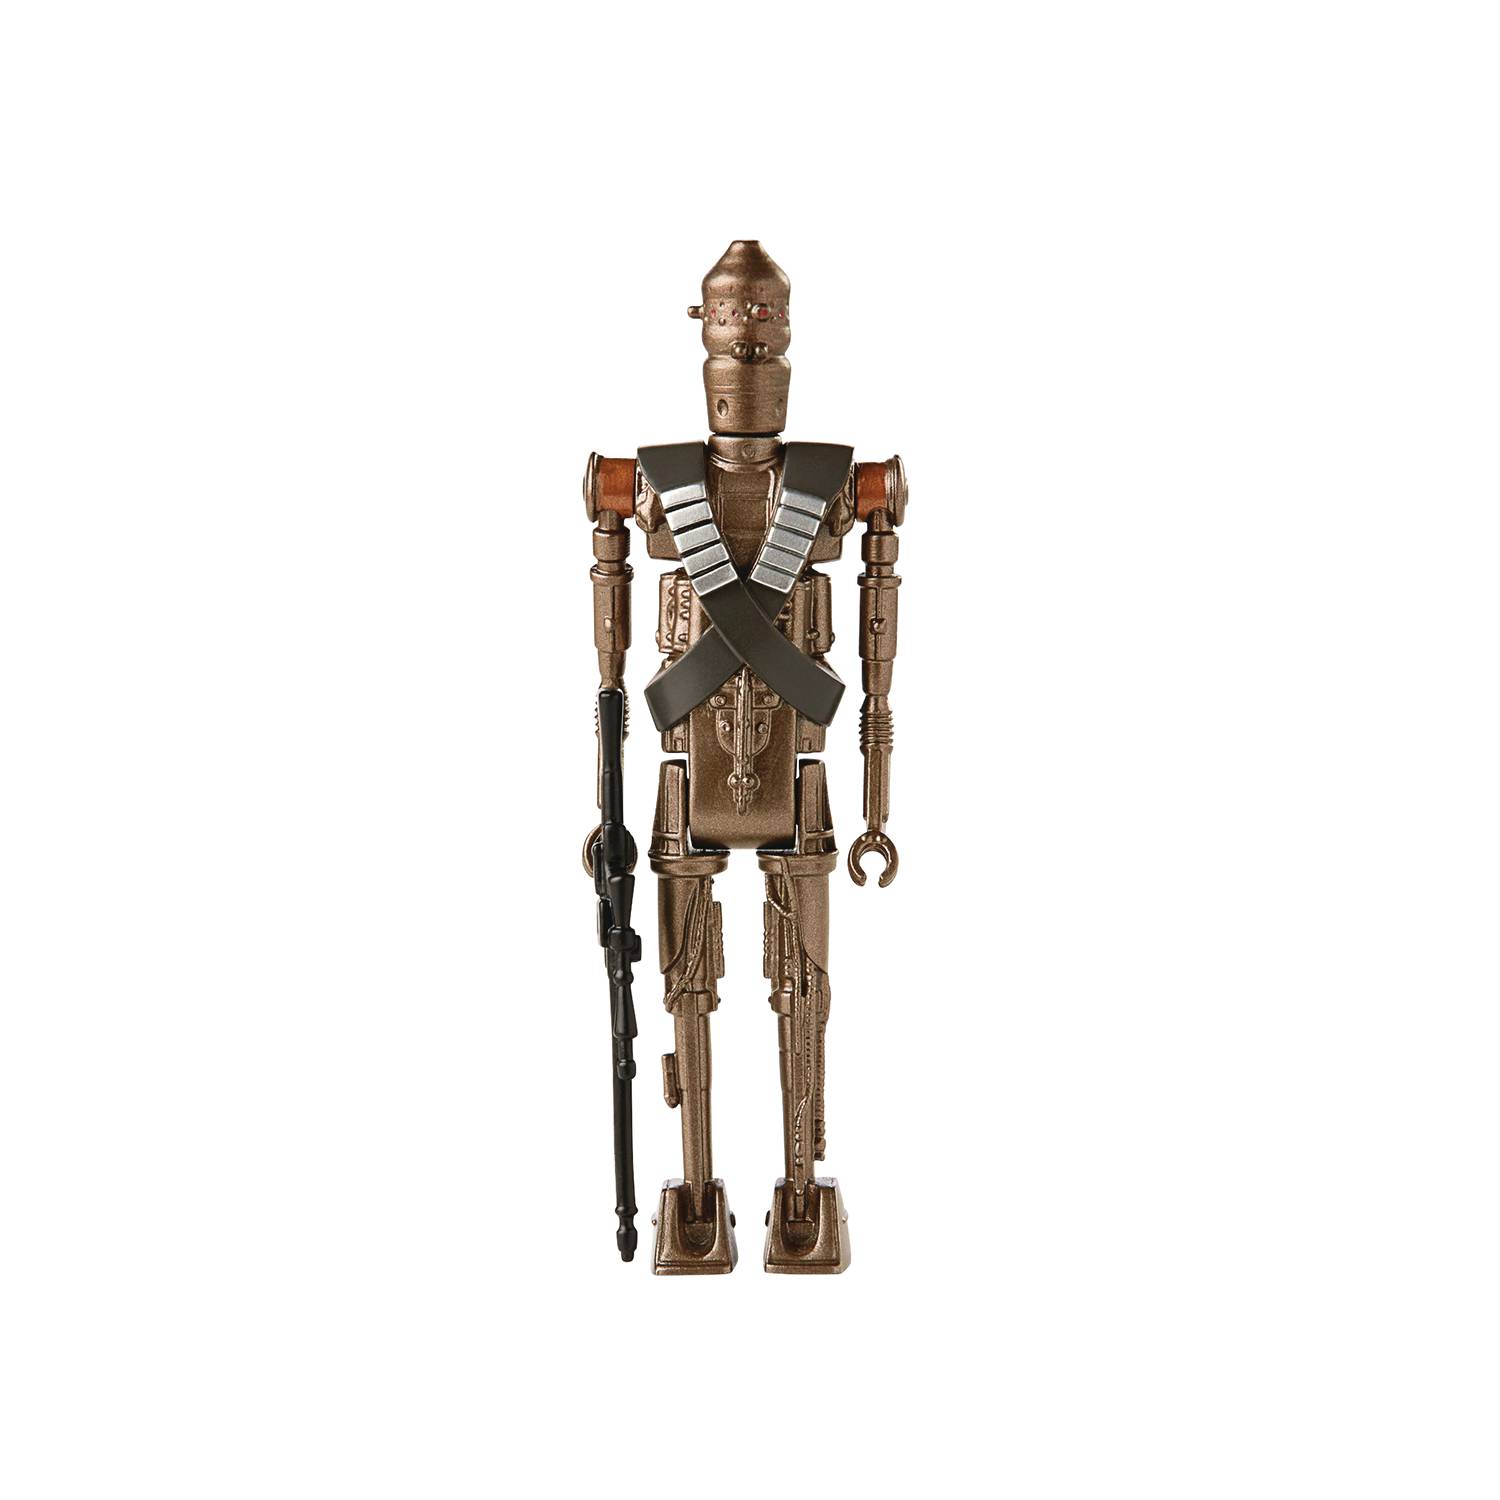 Star Wars Retro Collection - The Mandalorian - IG-11 3.75inch Action Figure